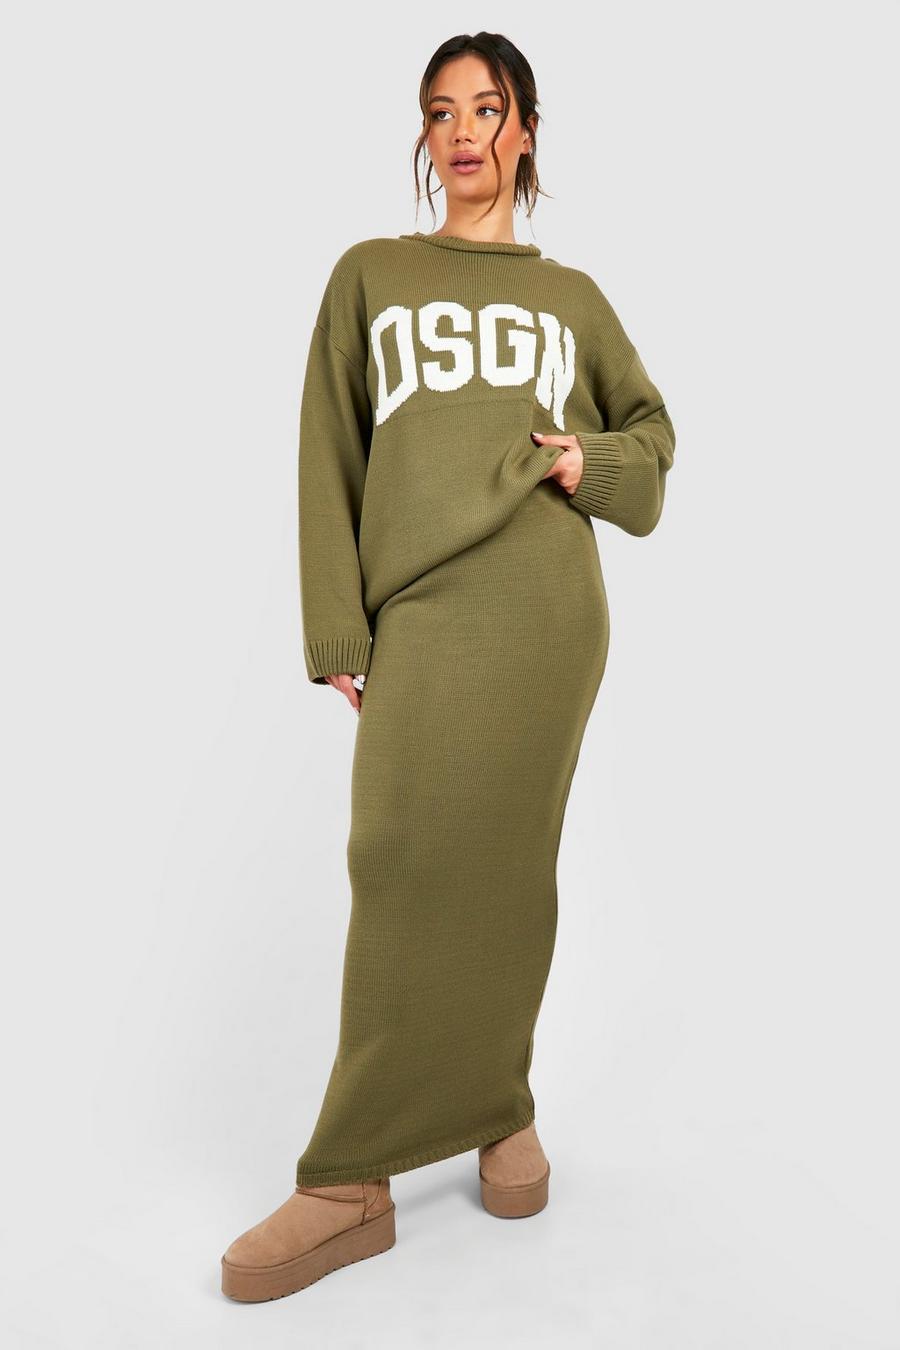 Khaki Dsgn Crew Neck Knitted Sweater And Maxi Skirt Set image number 1